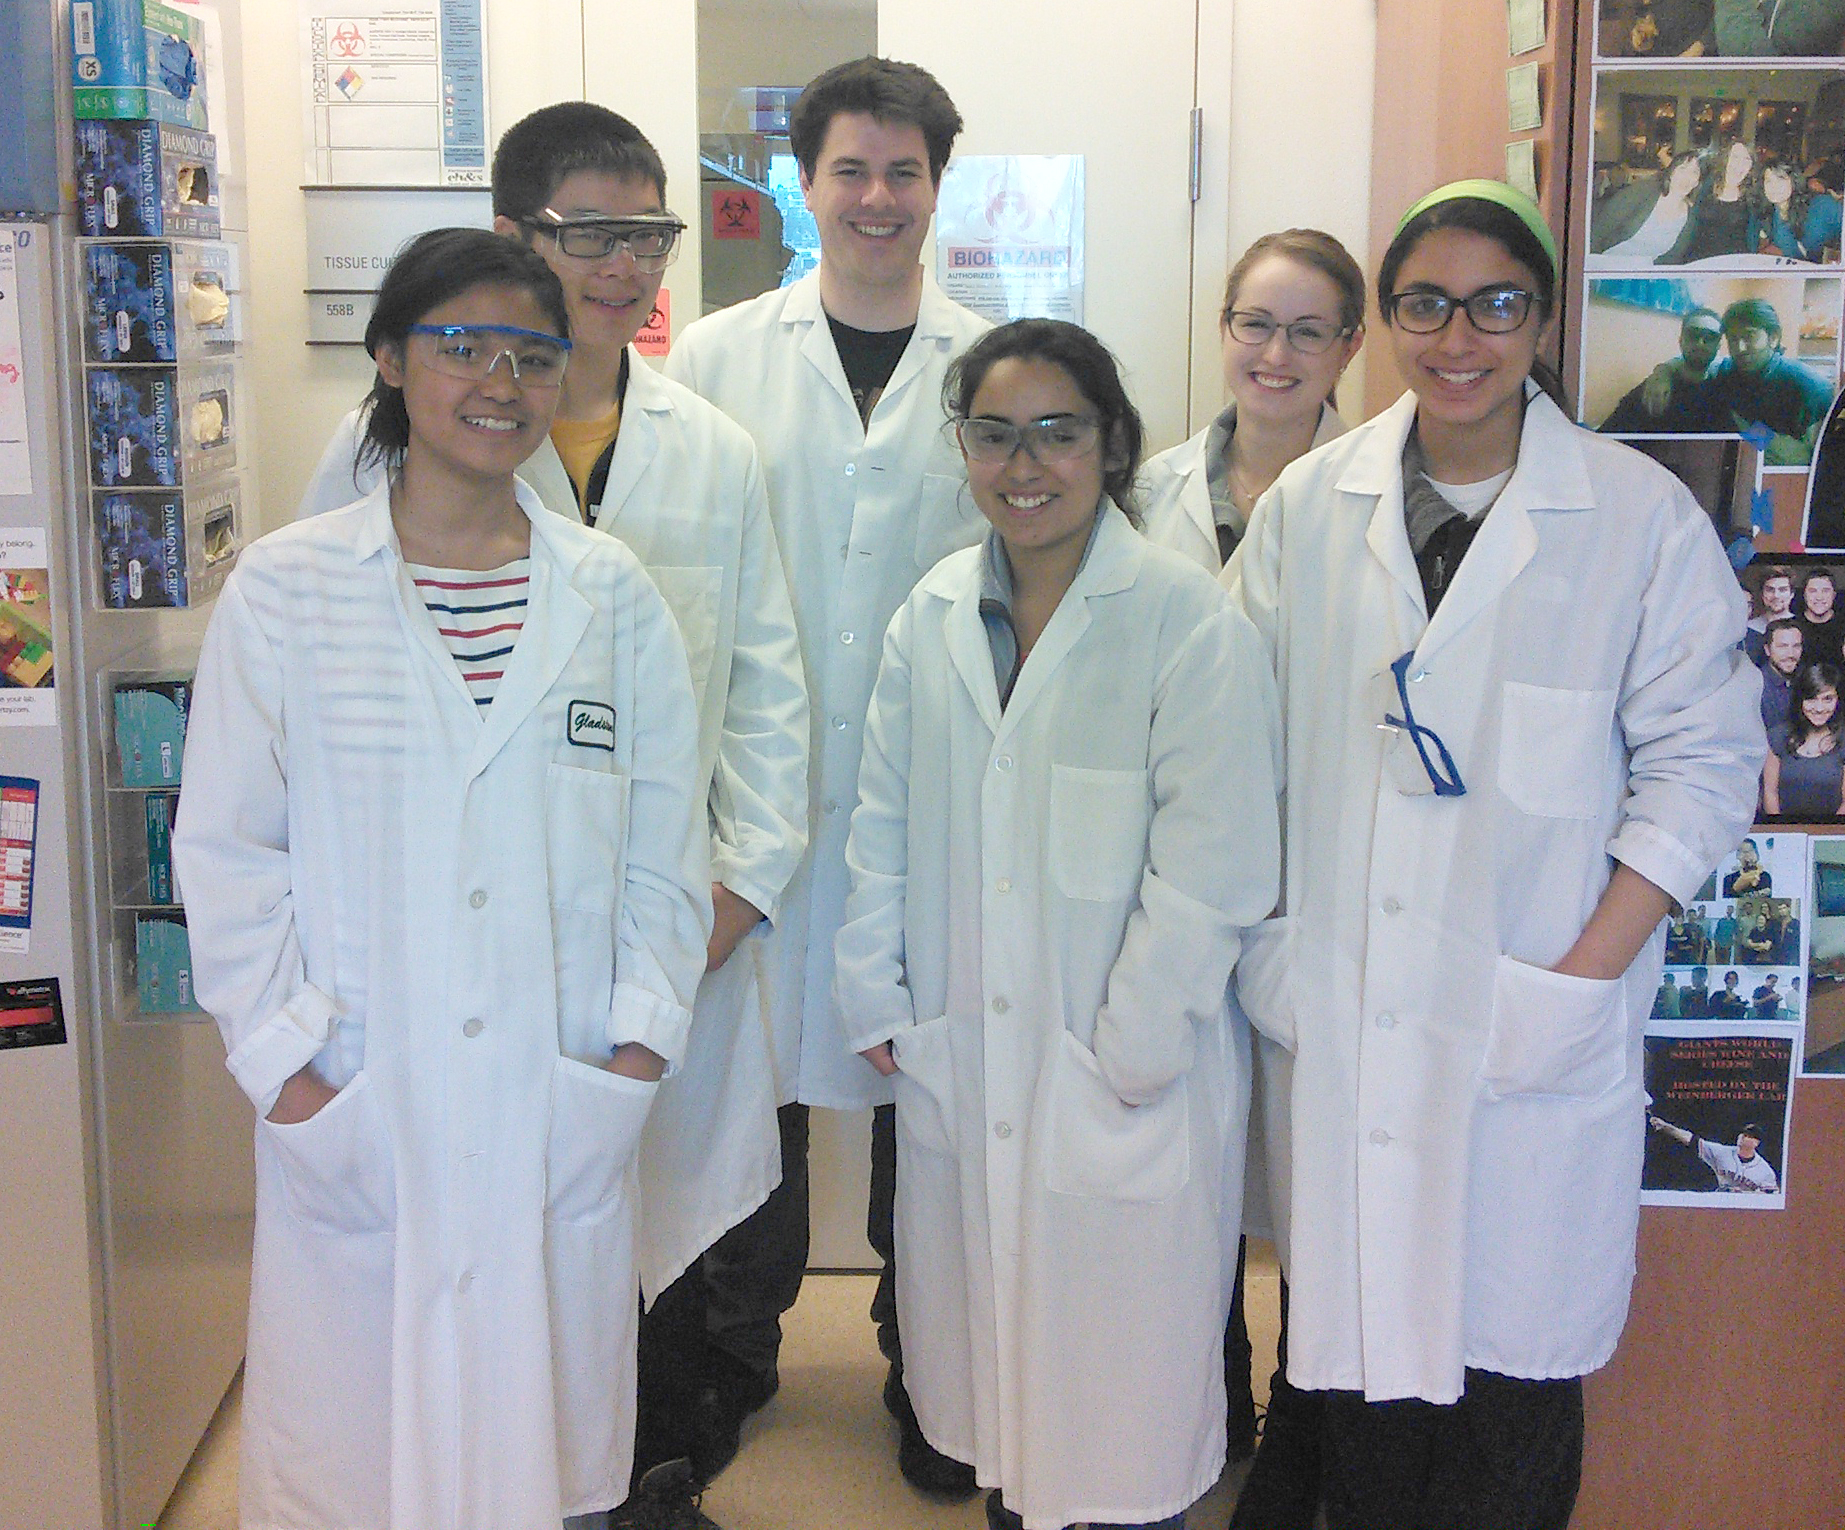  Jon and Victoria with Gladstone's 2015 Diversity Interns after an afternoon learning sterile techniques! 